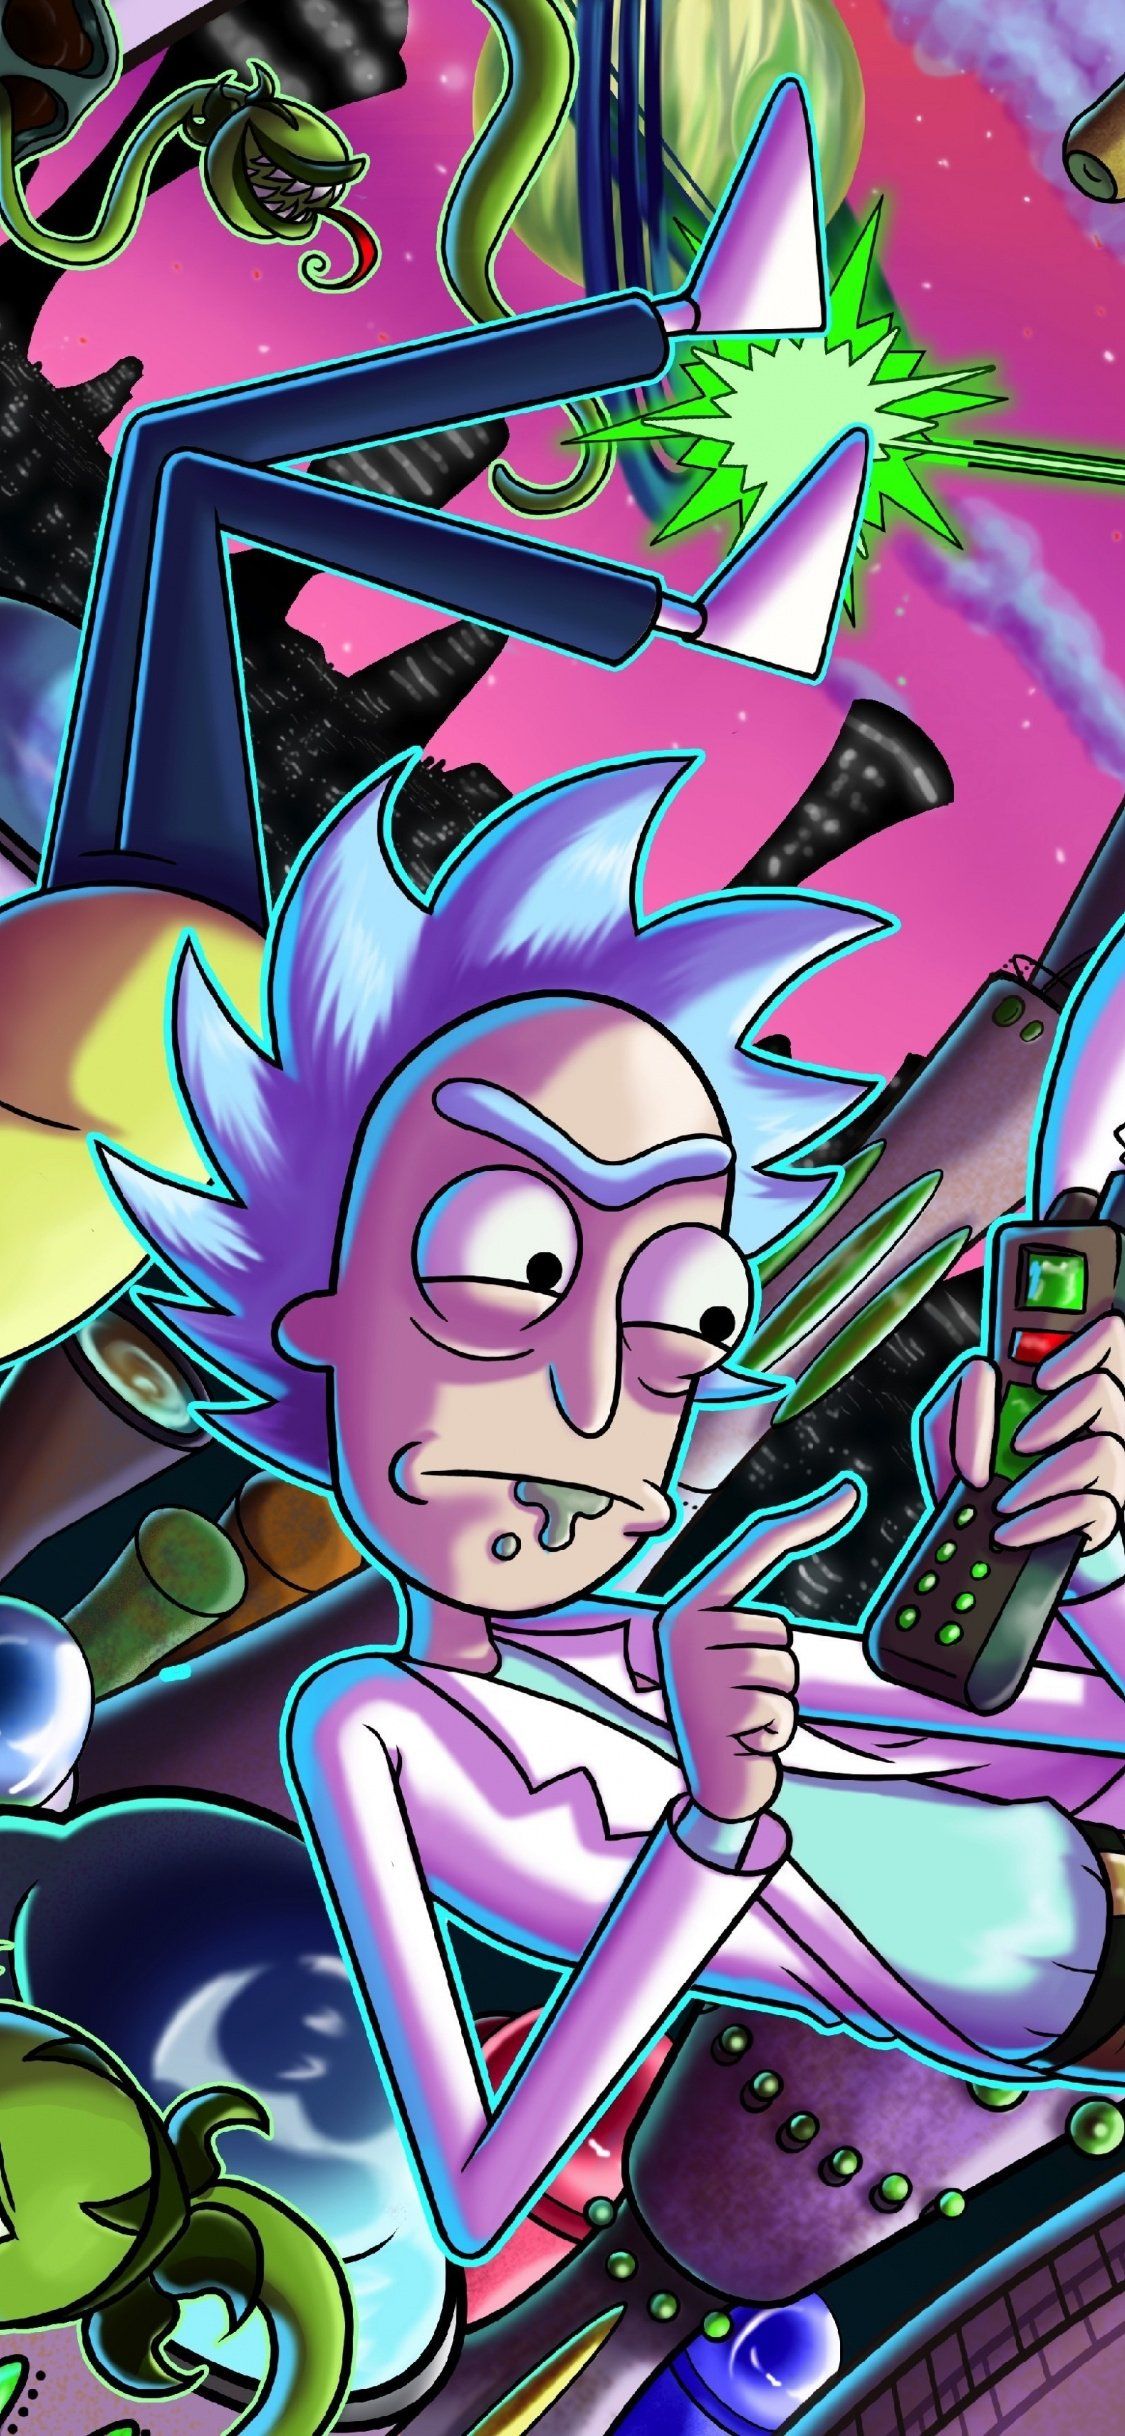 Rick And Morty iPhone X Wallpaper